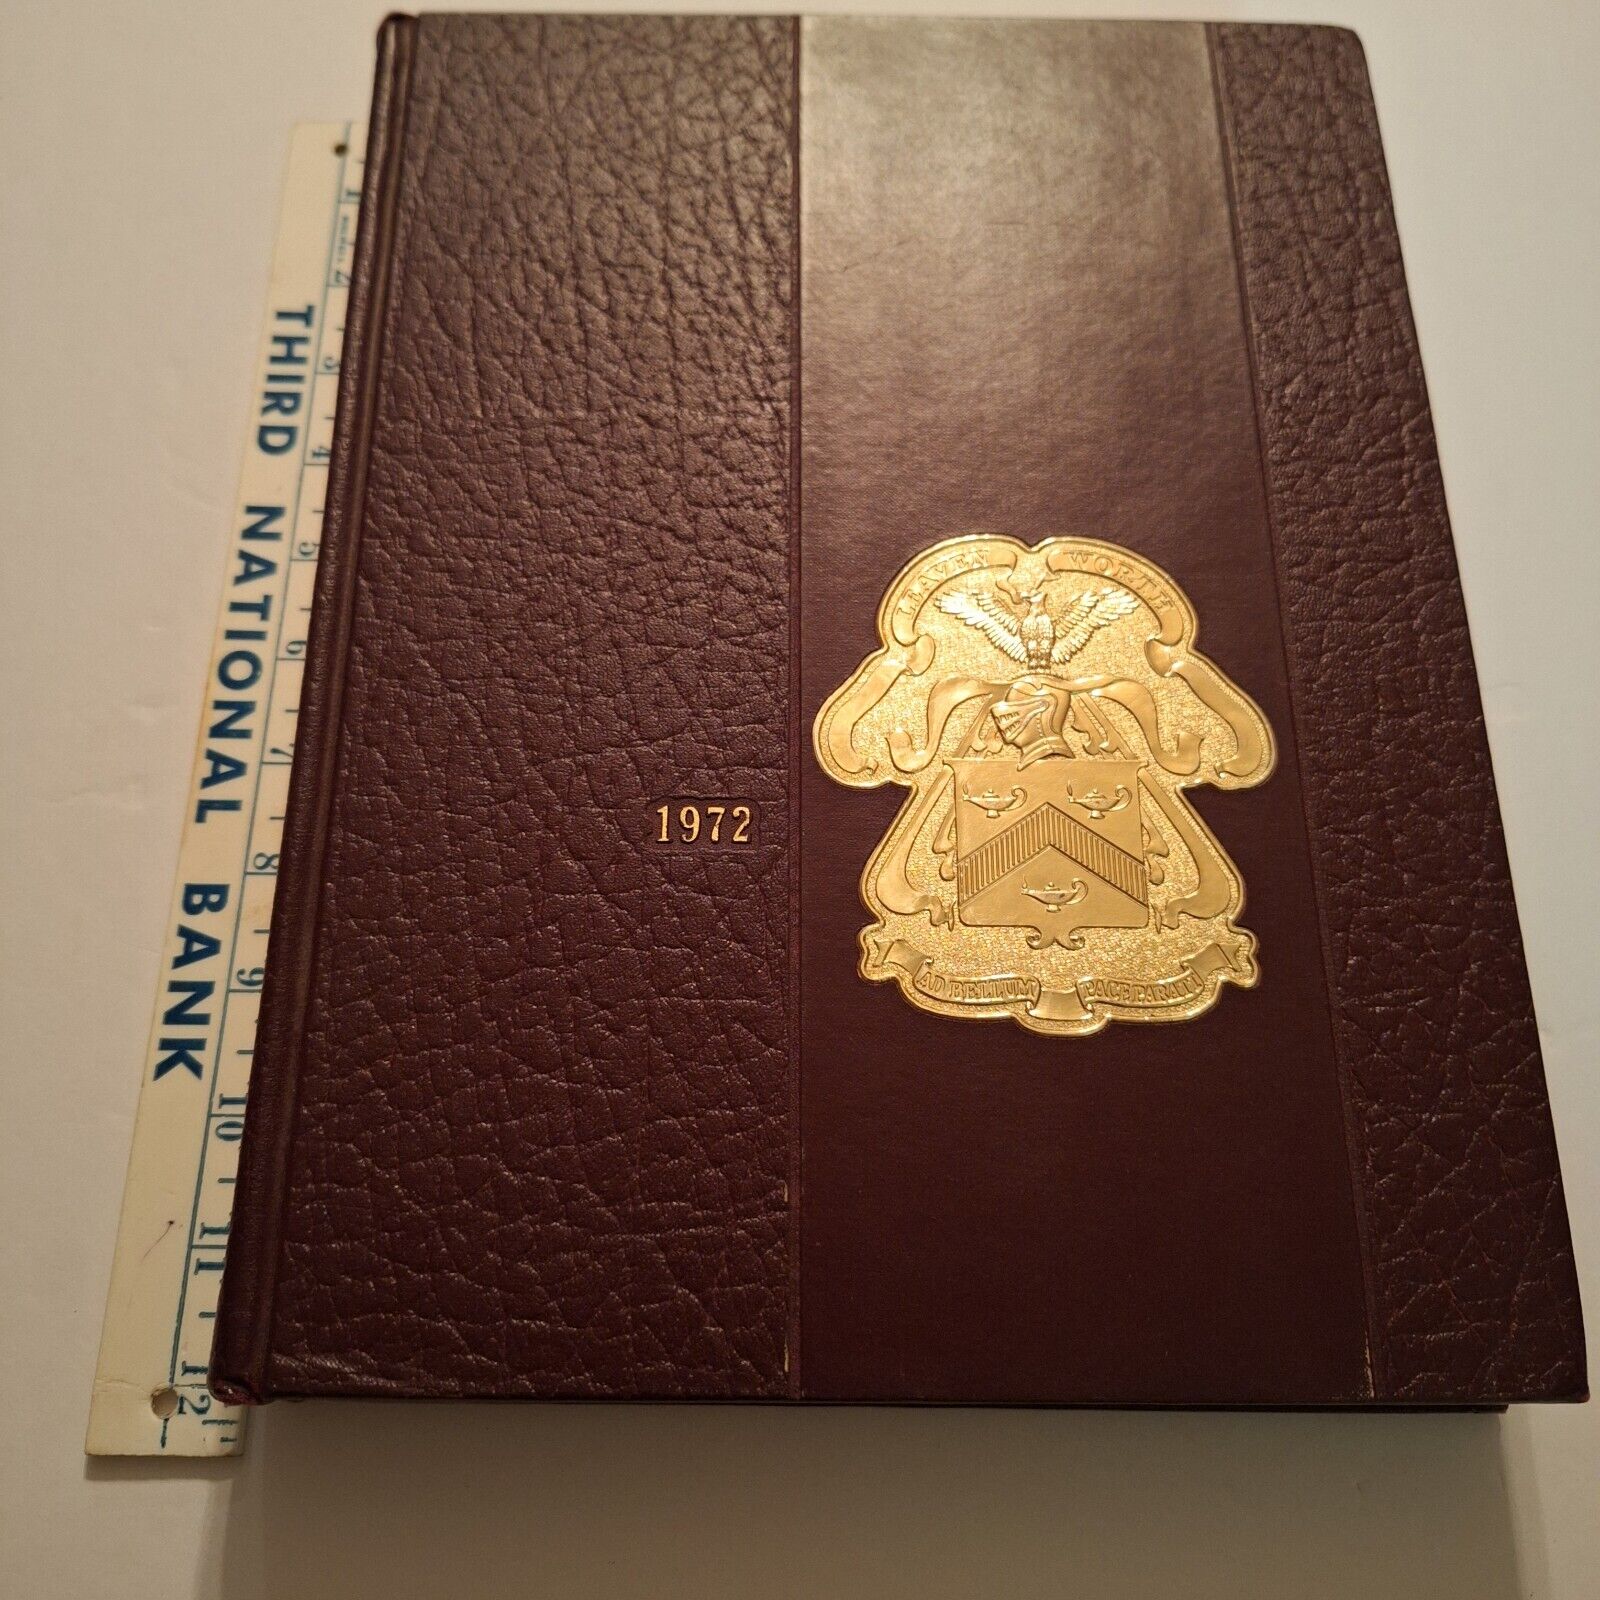 The Bell Command and General Staff College Class of 1971-72 yearbook